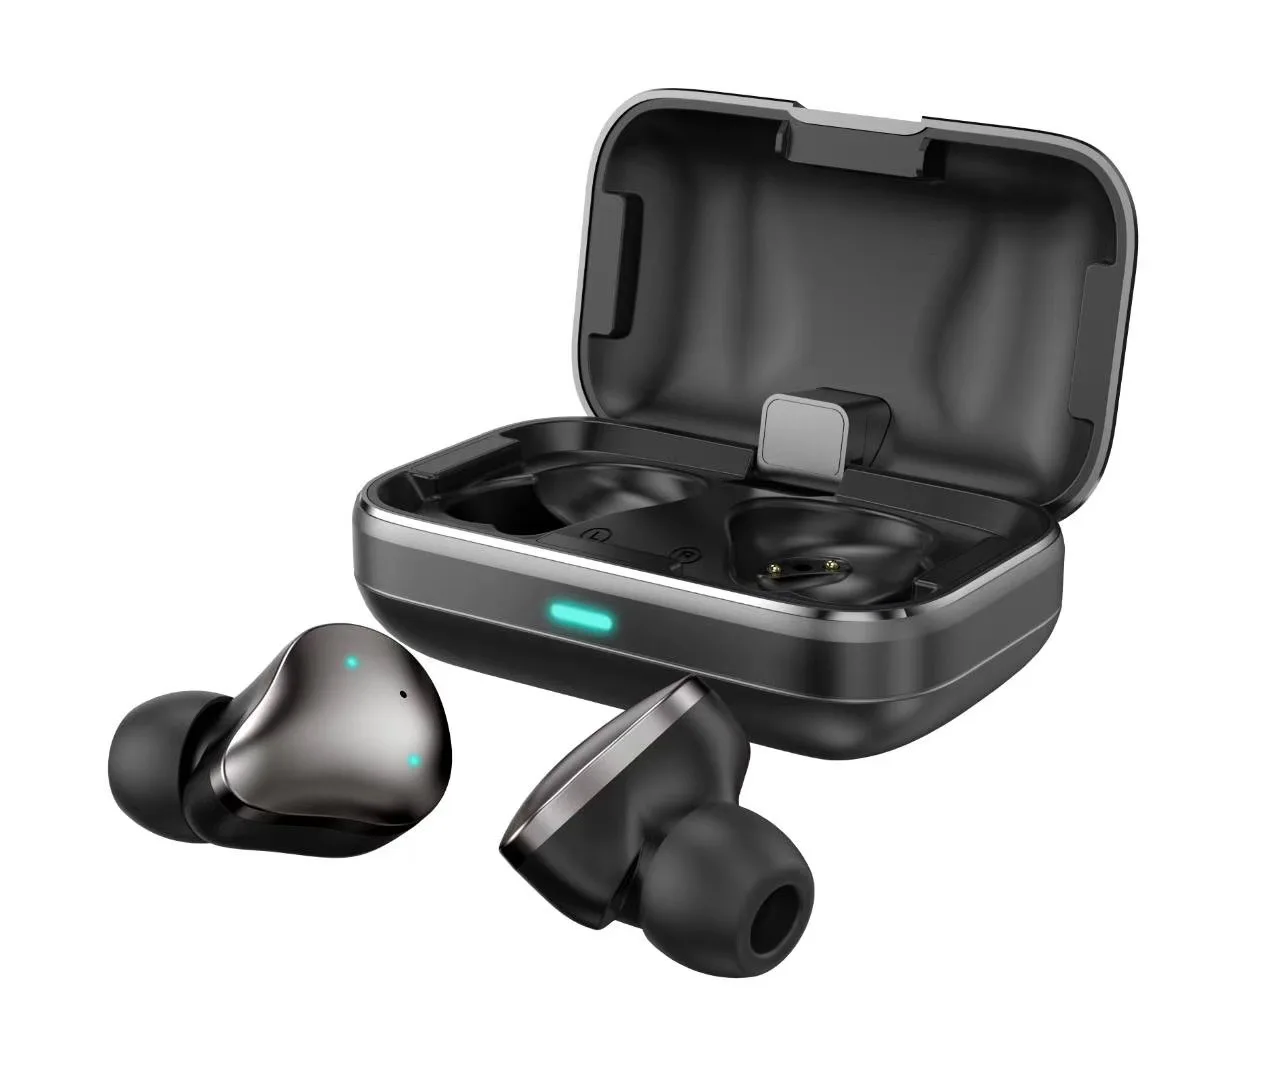 

True Wireless Bluetooth Gaming Earbuds 60ms Low Latency IPX4 Water Resistant - Bluetooth 5.0 Auto Pairing